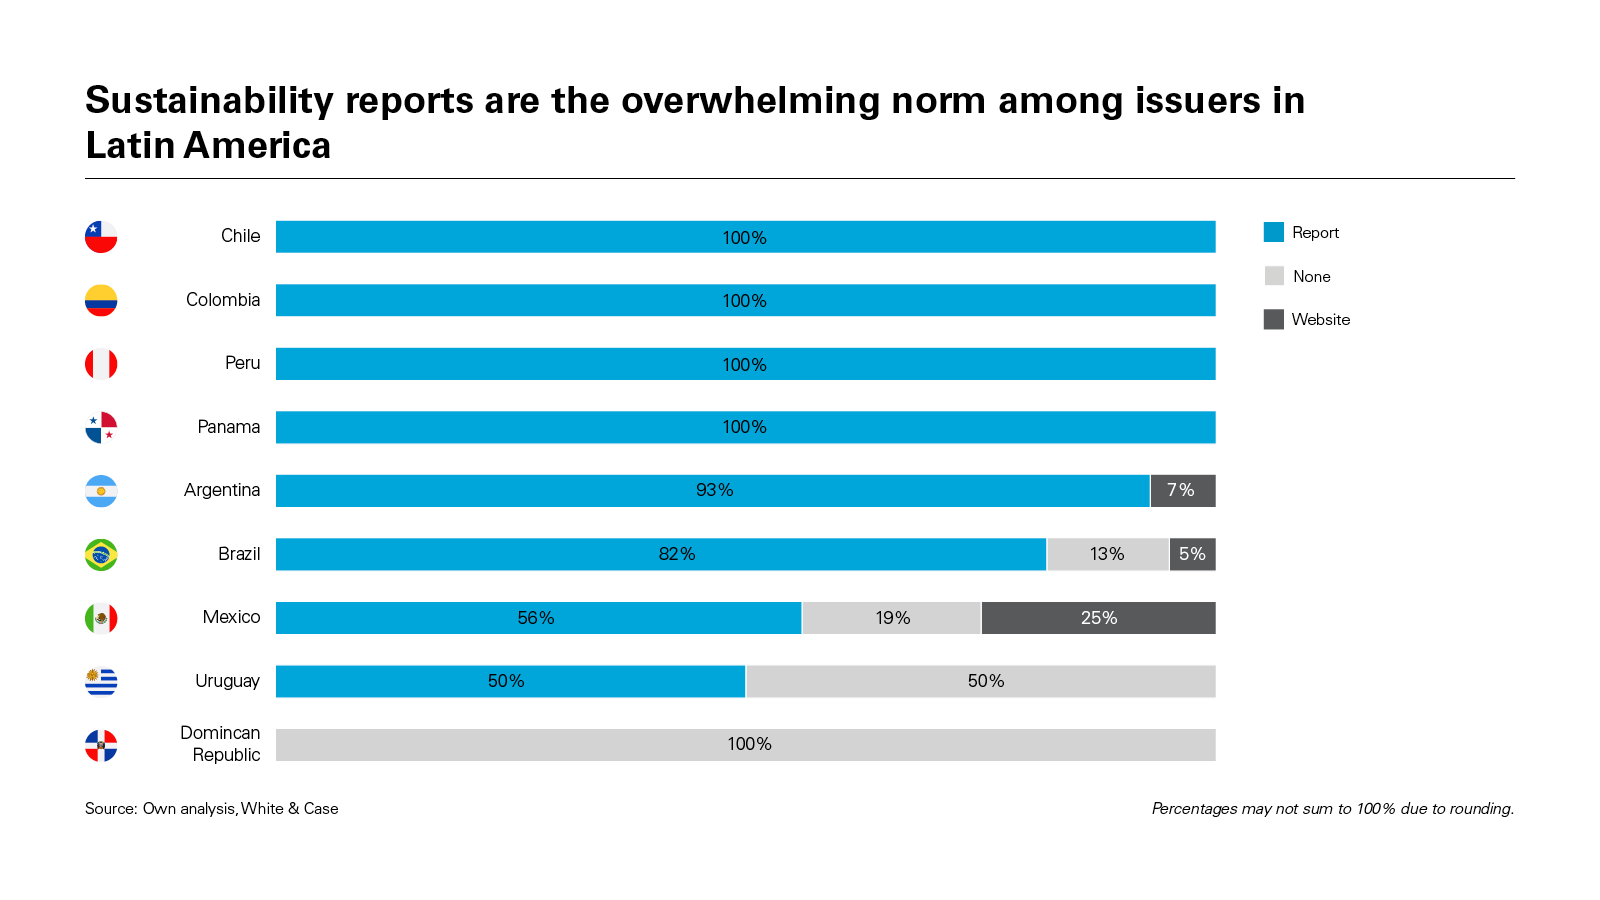 Sustainability reports are the overwhelming norm among issuers in Latin America